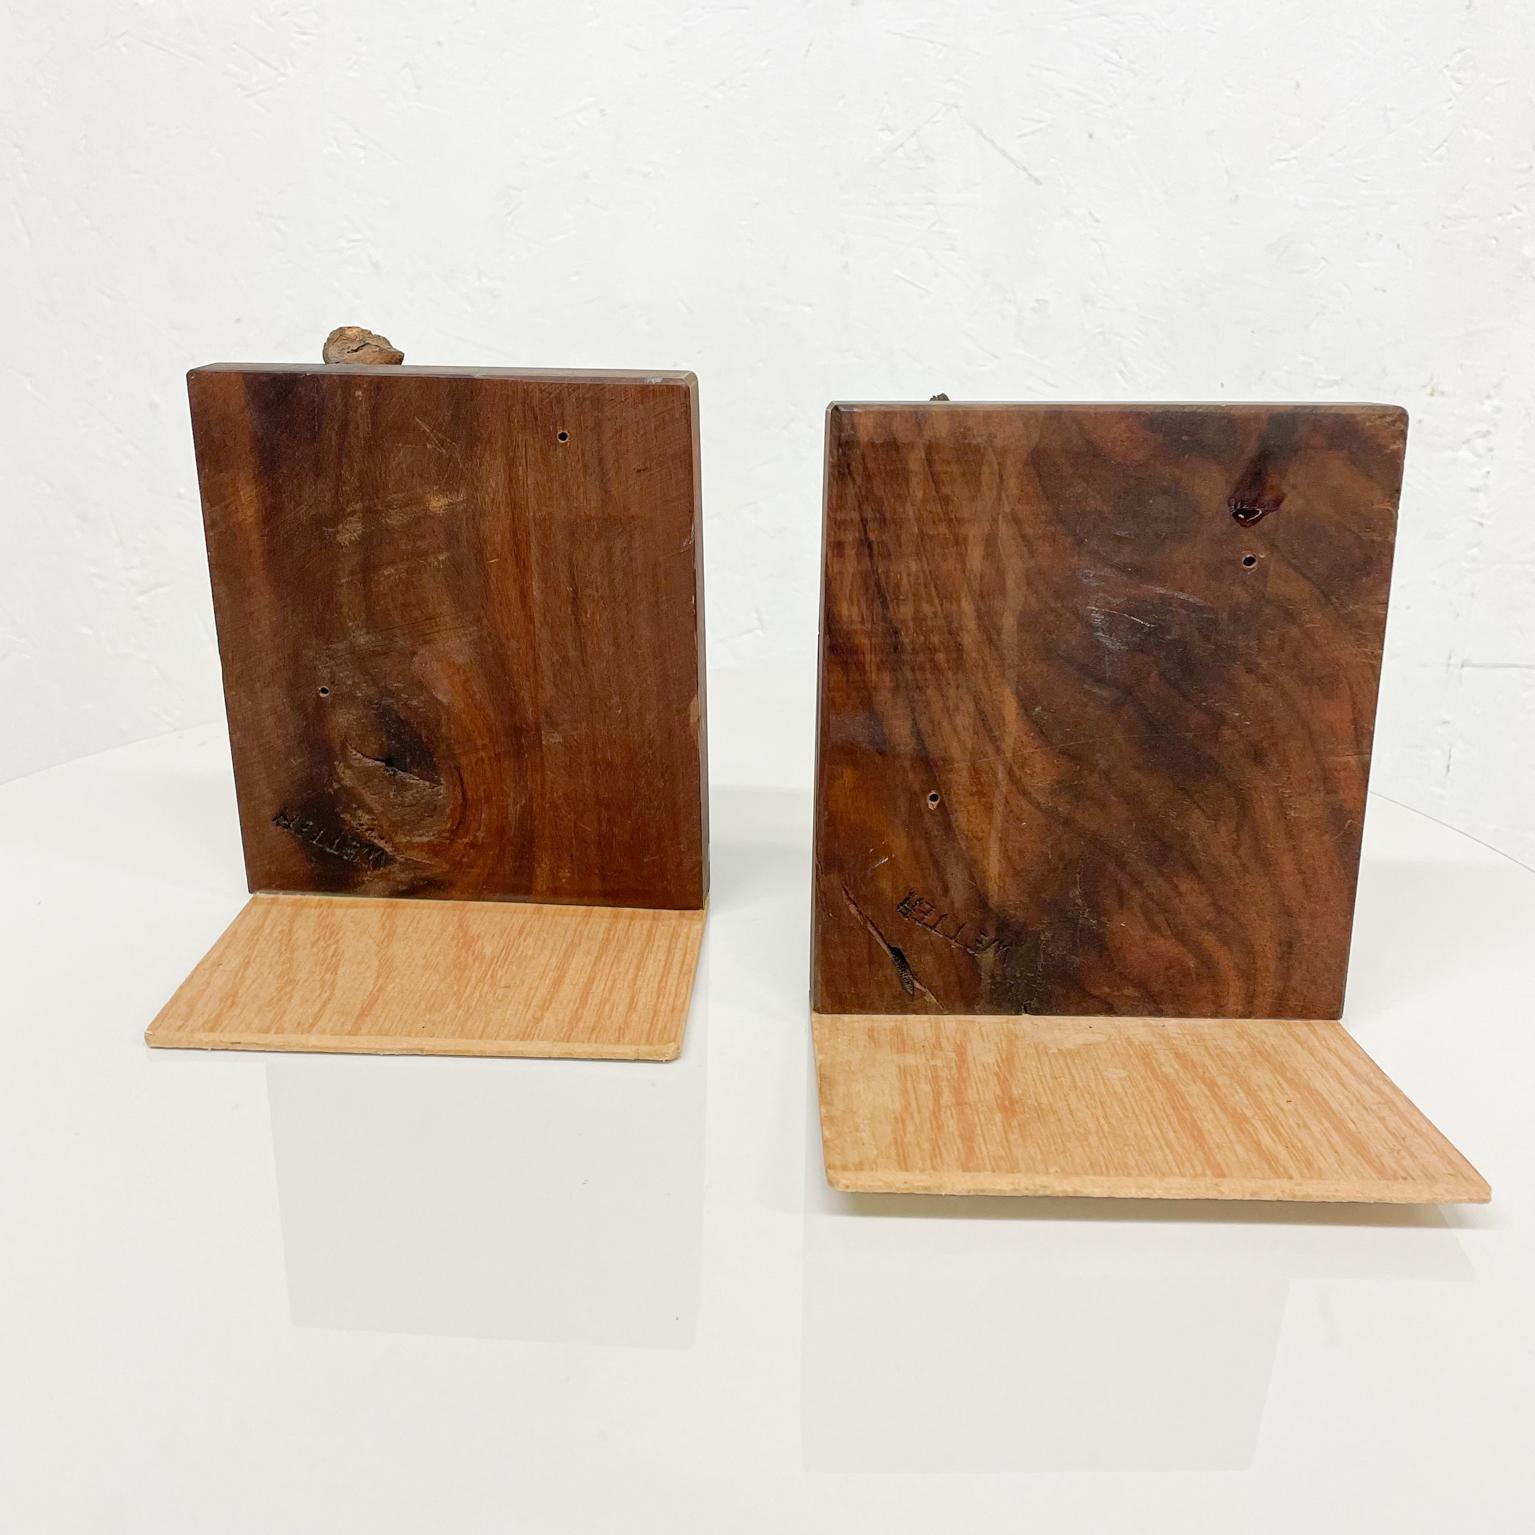 Pair of Bookends Walnut Wood Live Edge Design Organic Form 1970s For Sale 2